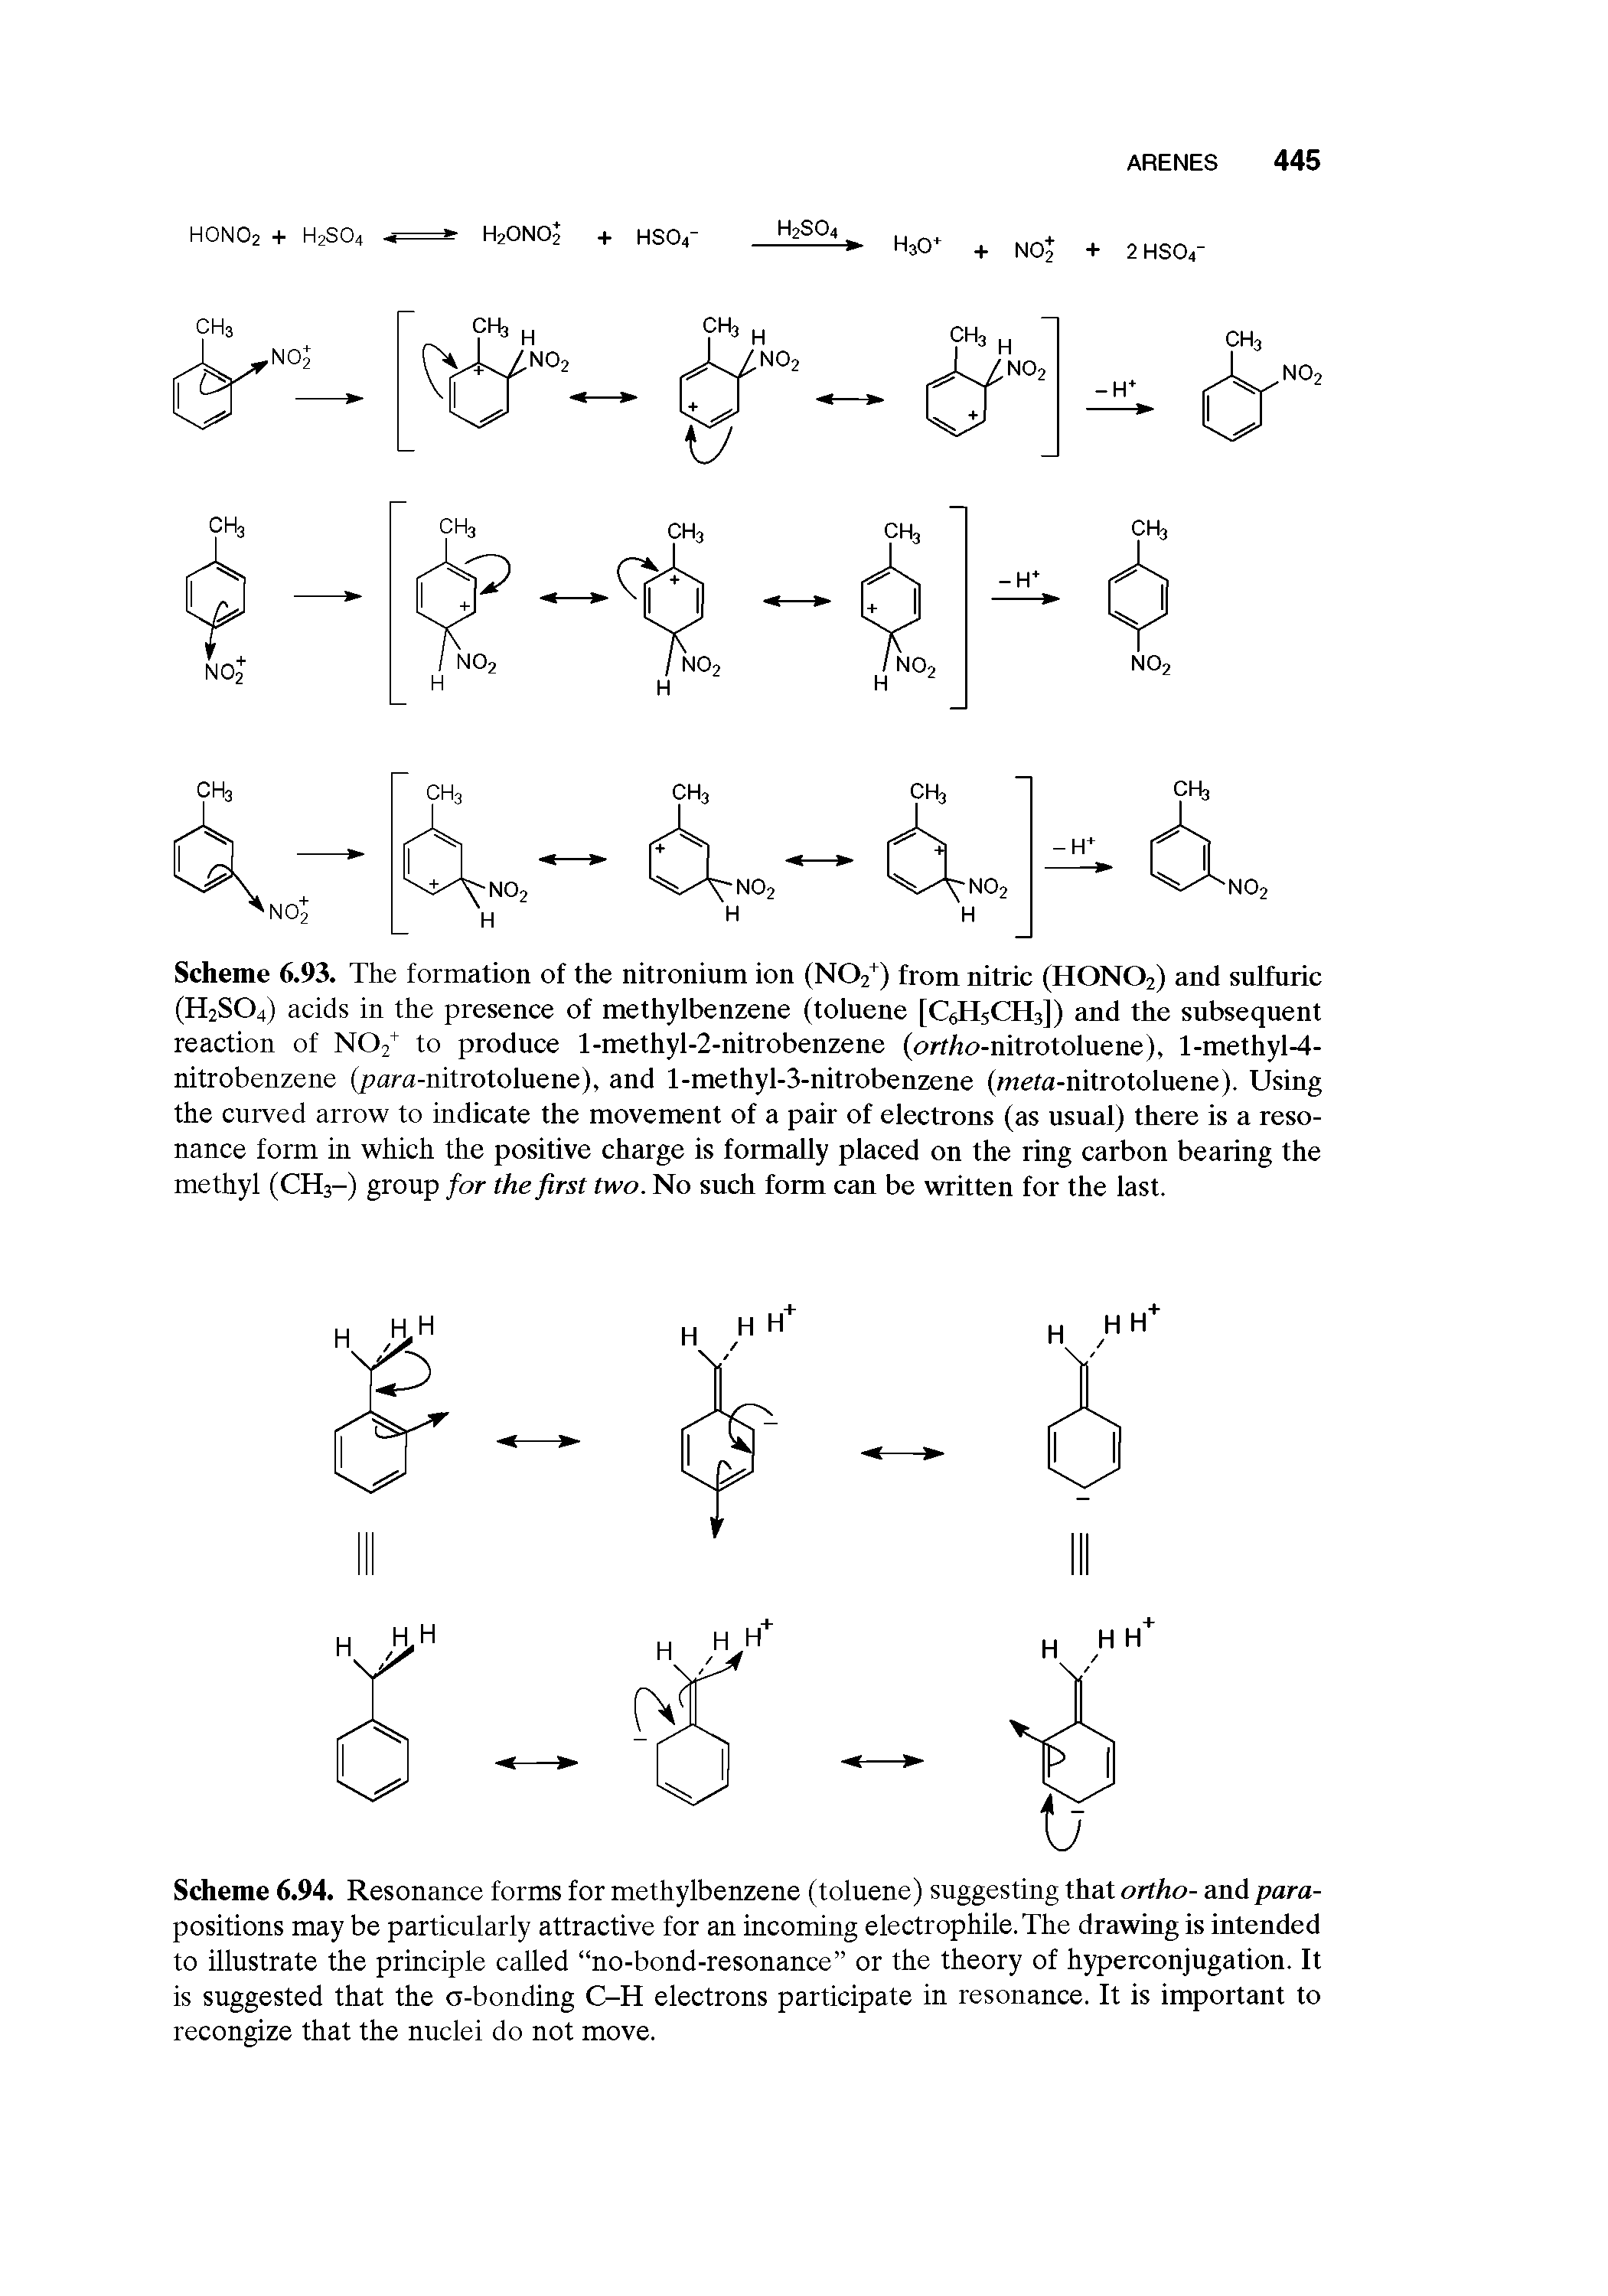 Scheme 6.94. Resonance forms for methylbenzene (toluene) suggesting that ortho- and para-positions may be particularly attractive for an incoming electrophile. The drawing is intended to illustrate the principle called no-bond-resonance or the theory of hyperconjngation. It is suggested that the o-bonding C-H electrons participate in resonance. It is important to recongize that the nuclei do not move.